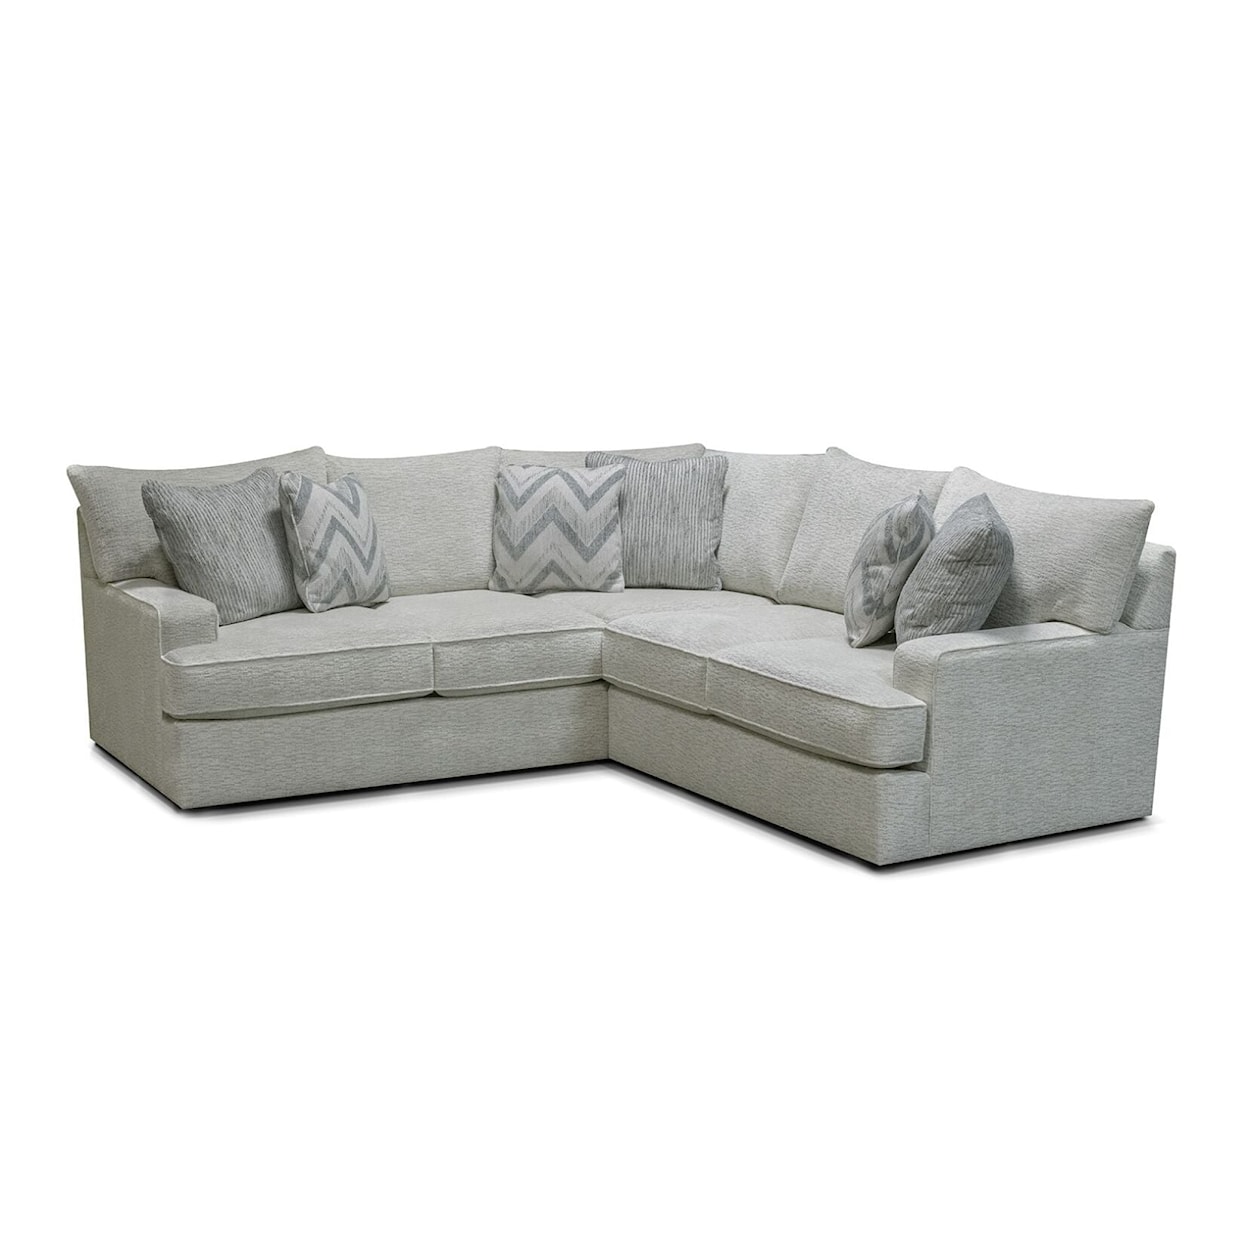 Tennessee Custom Upholstery 3300 Series 2-Piece Sectional Sofa